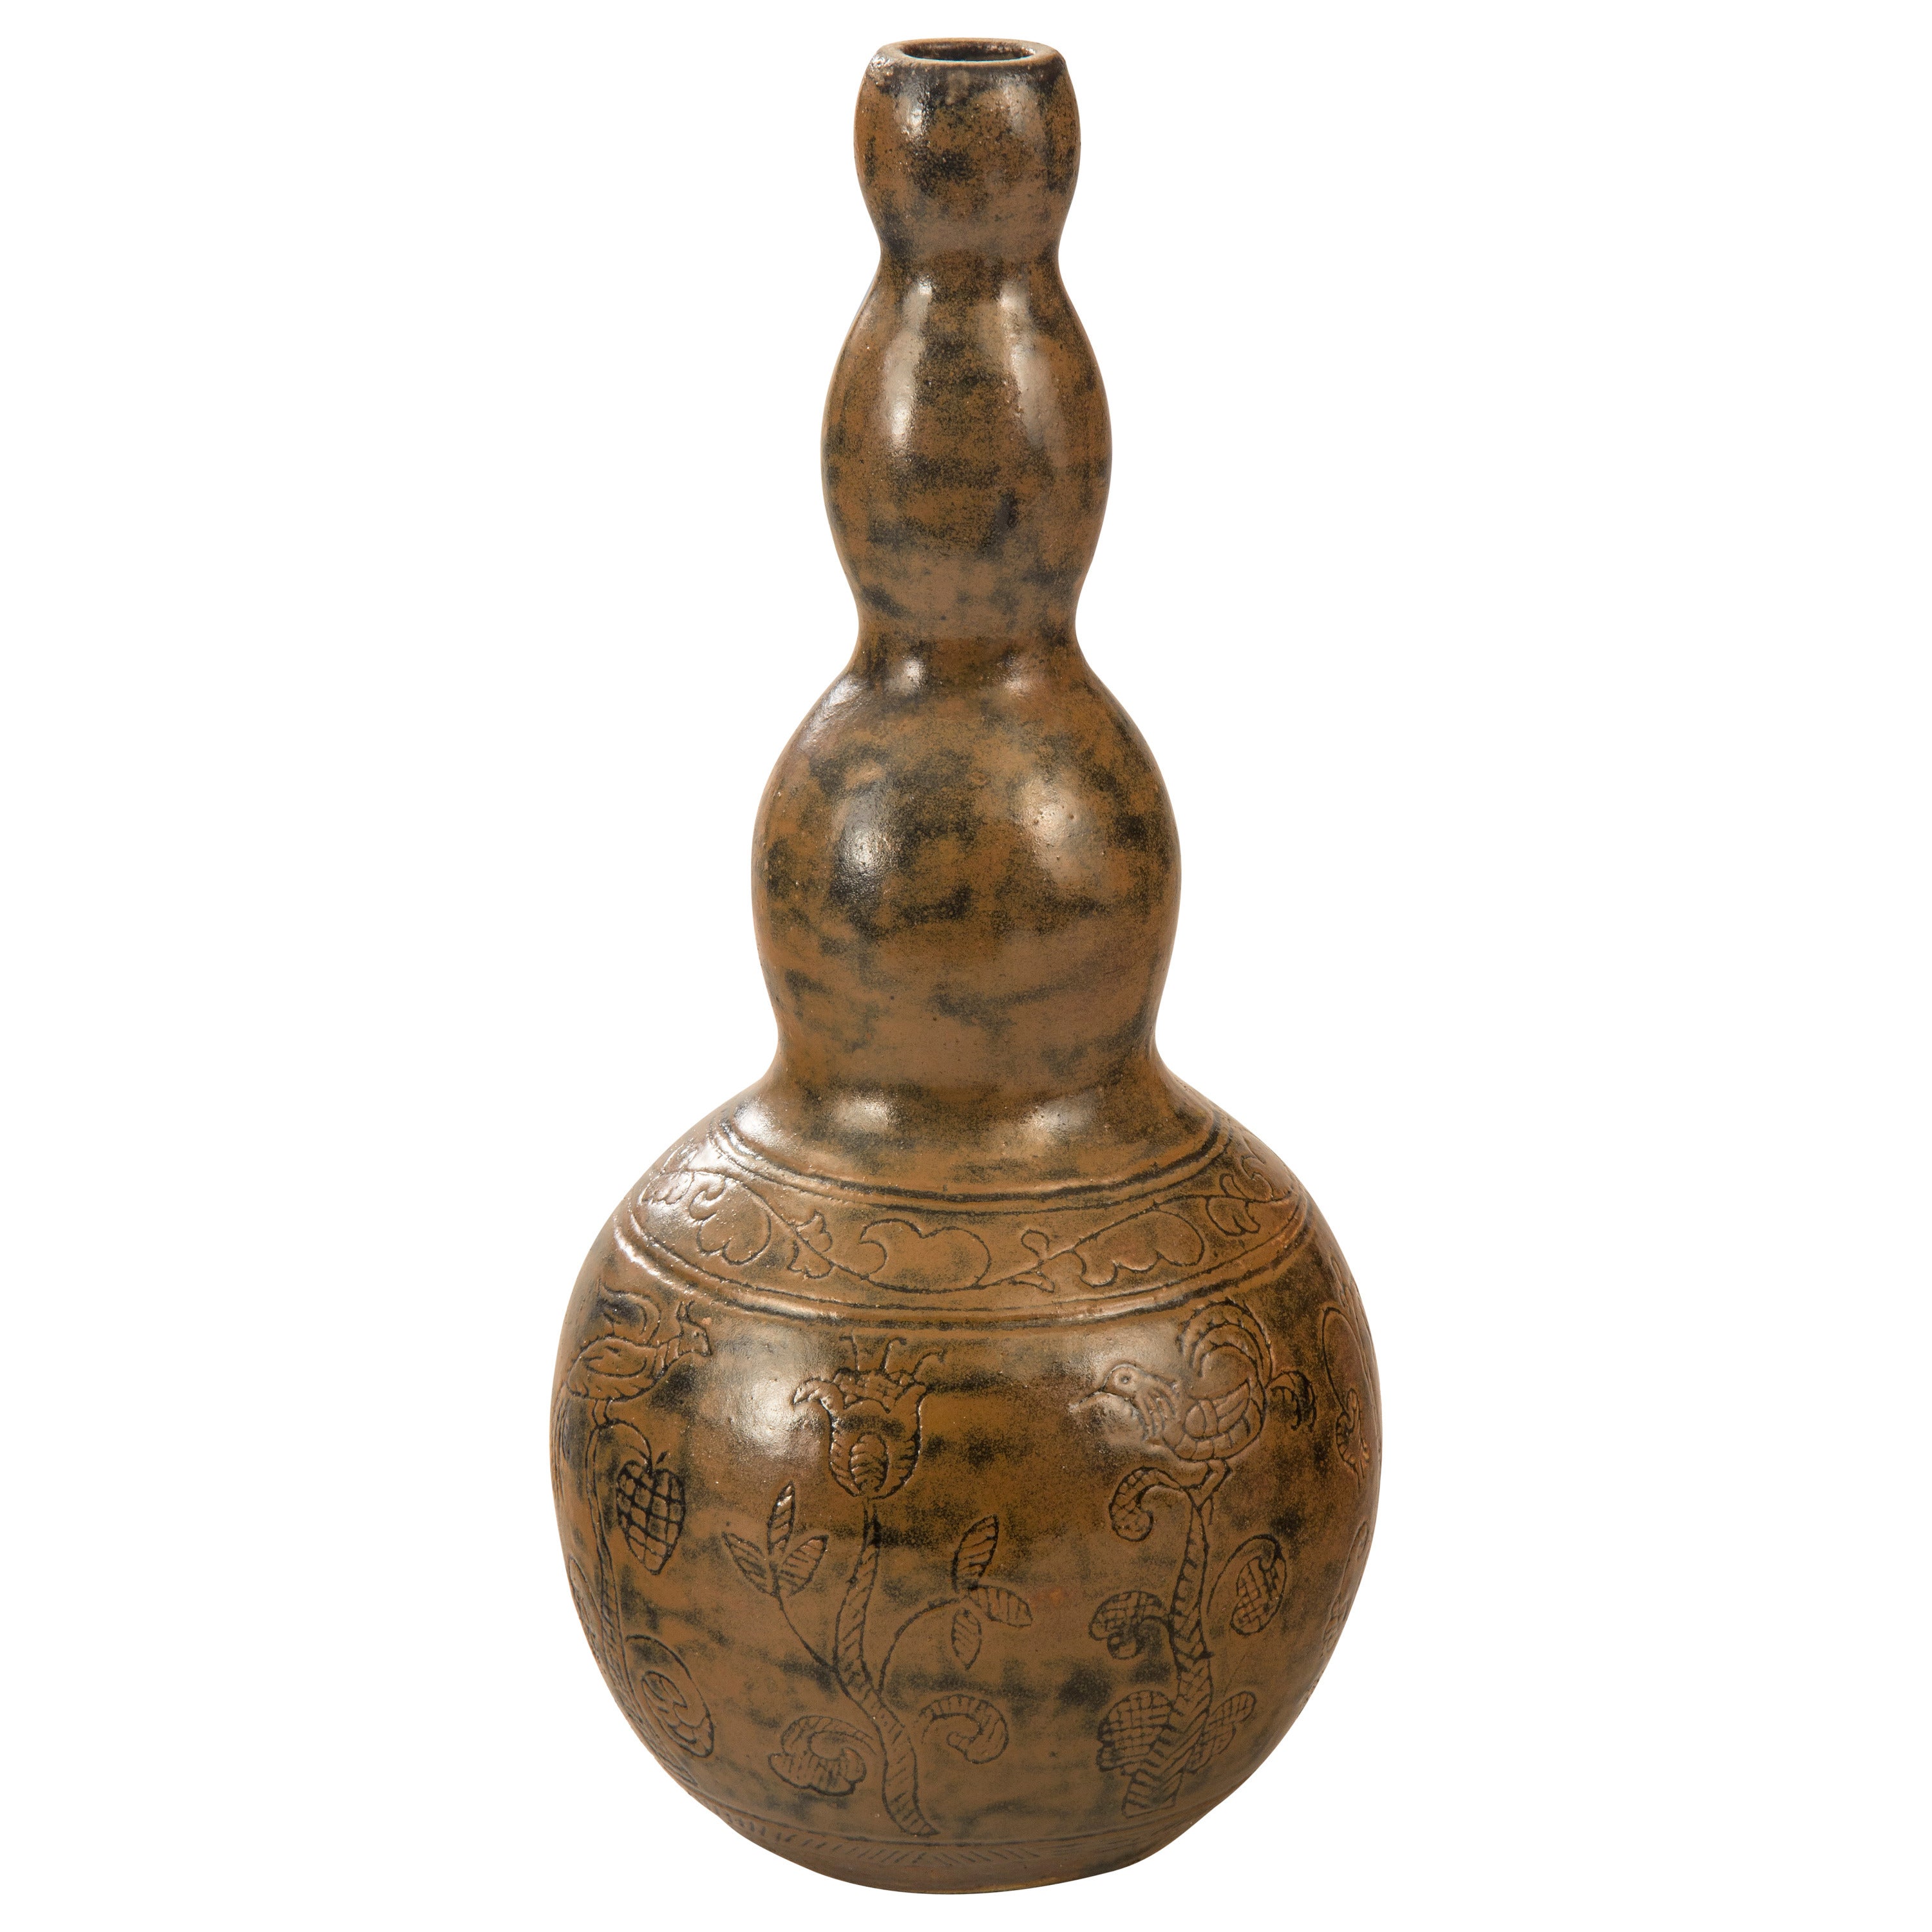 Seraphin Soudbinine, A Rare French Glazed and Incised Ceramic Vase For Sale